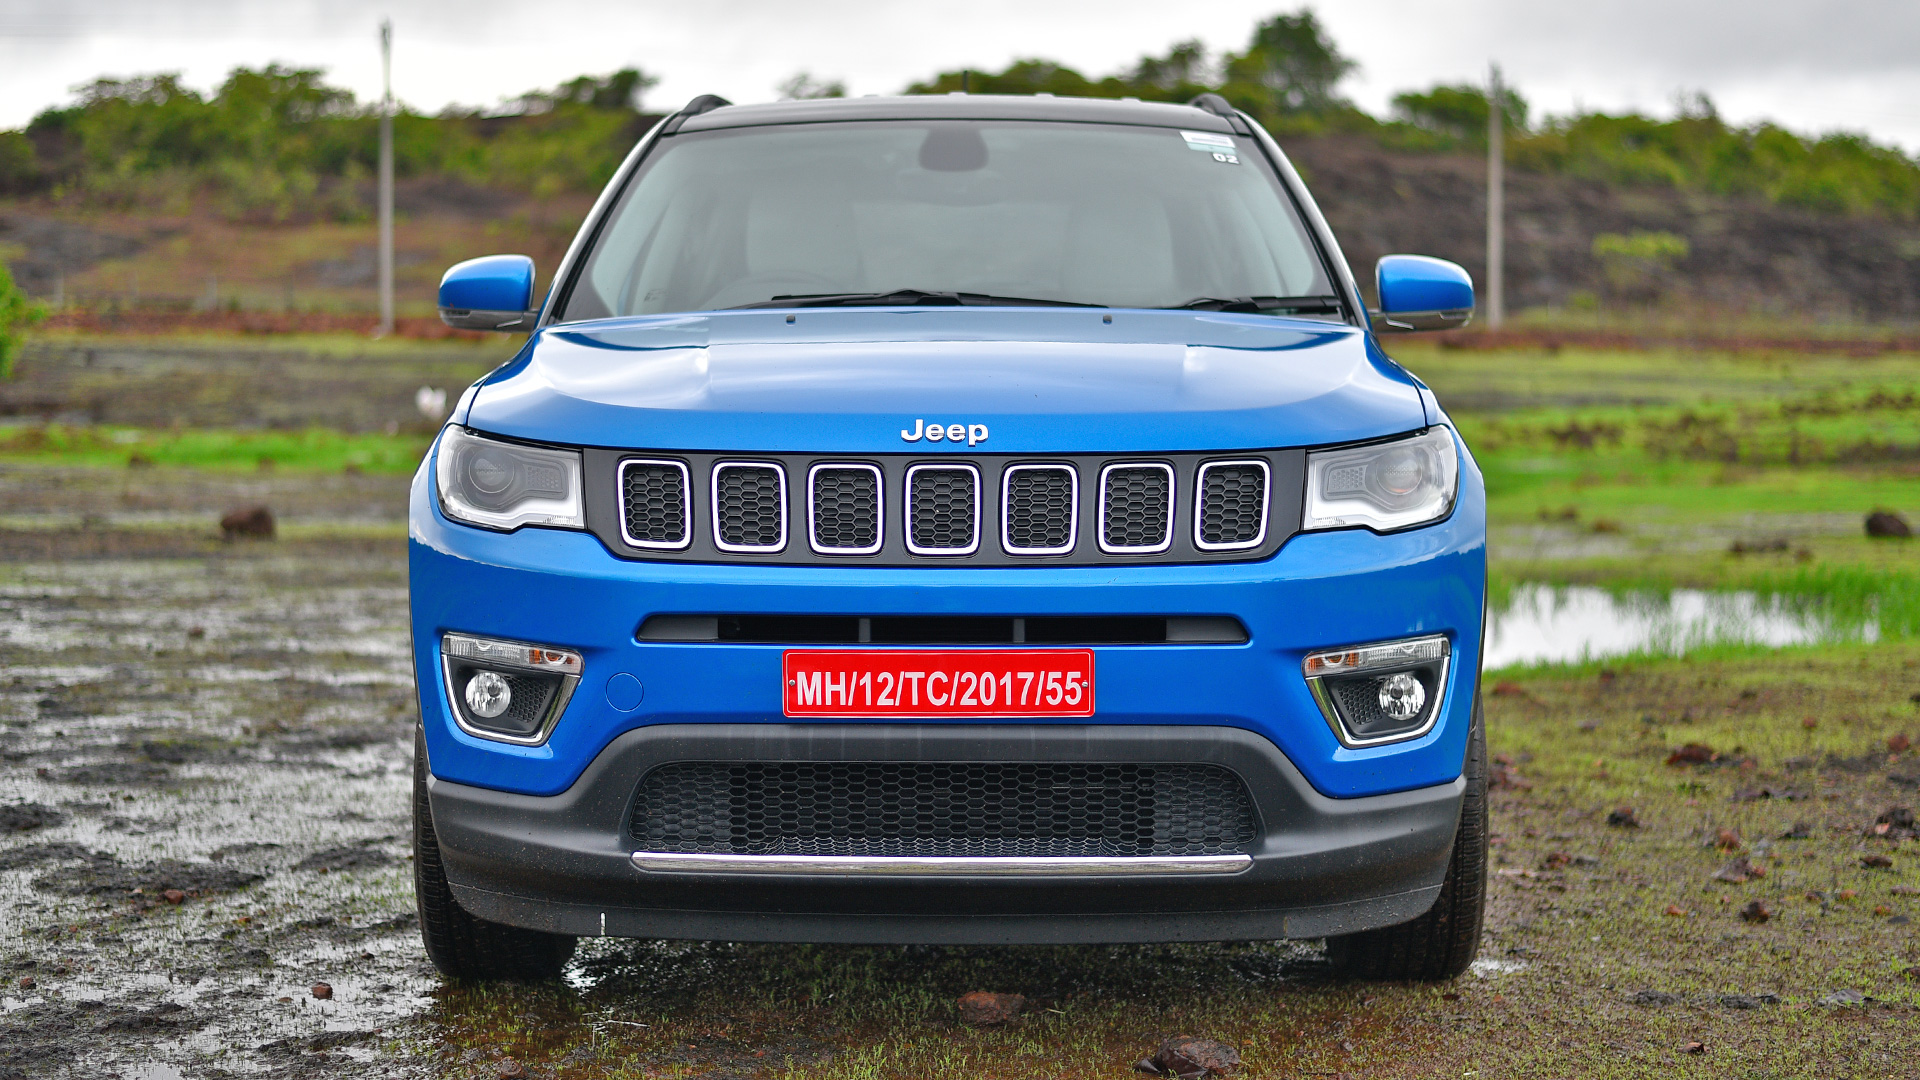 Jeep Compass 2017 Limited Diesel 4x4 Compare